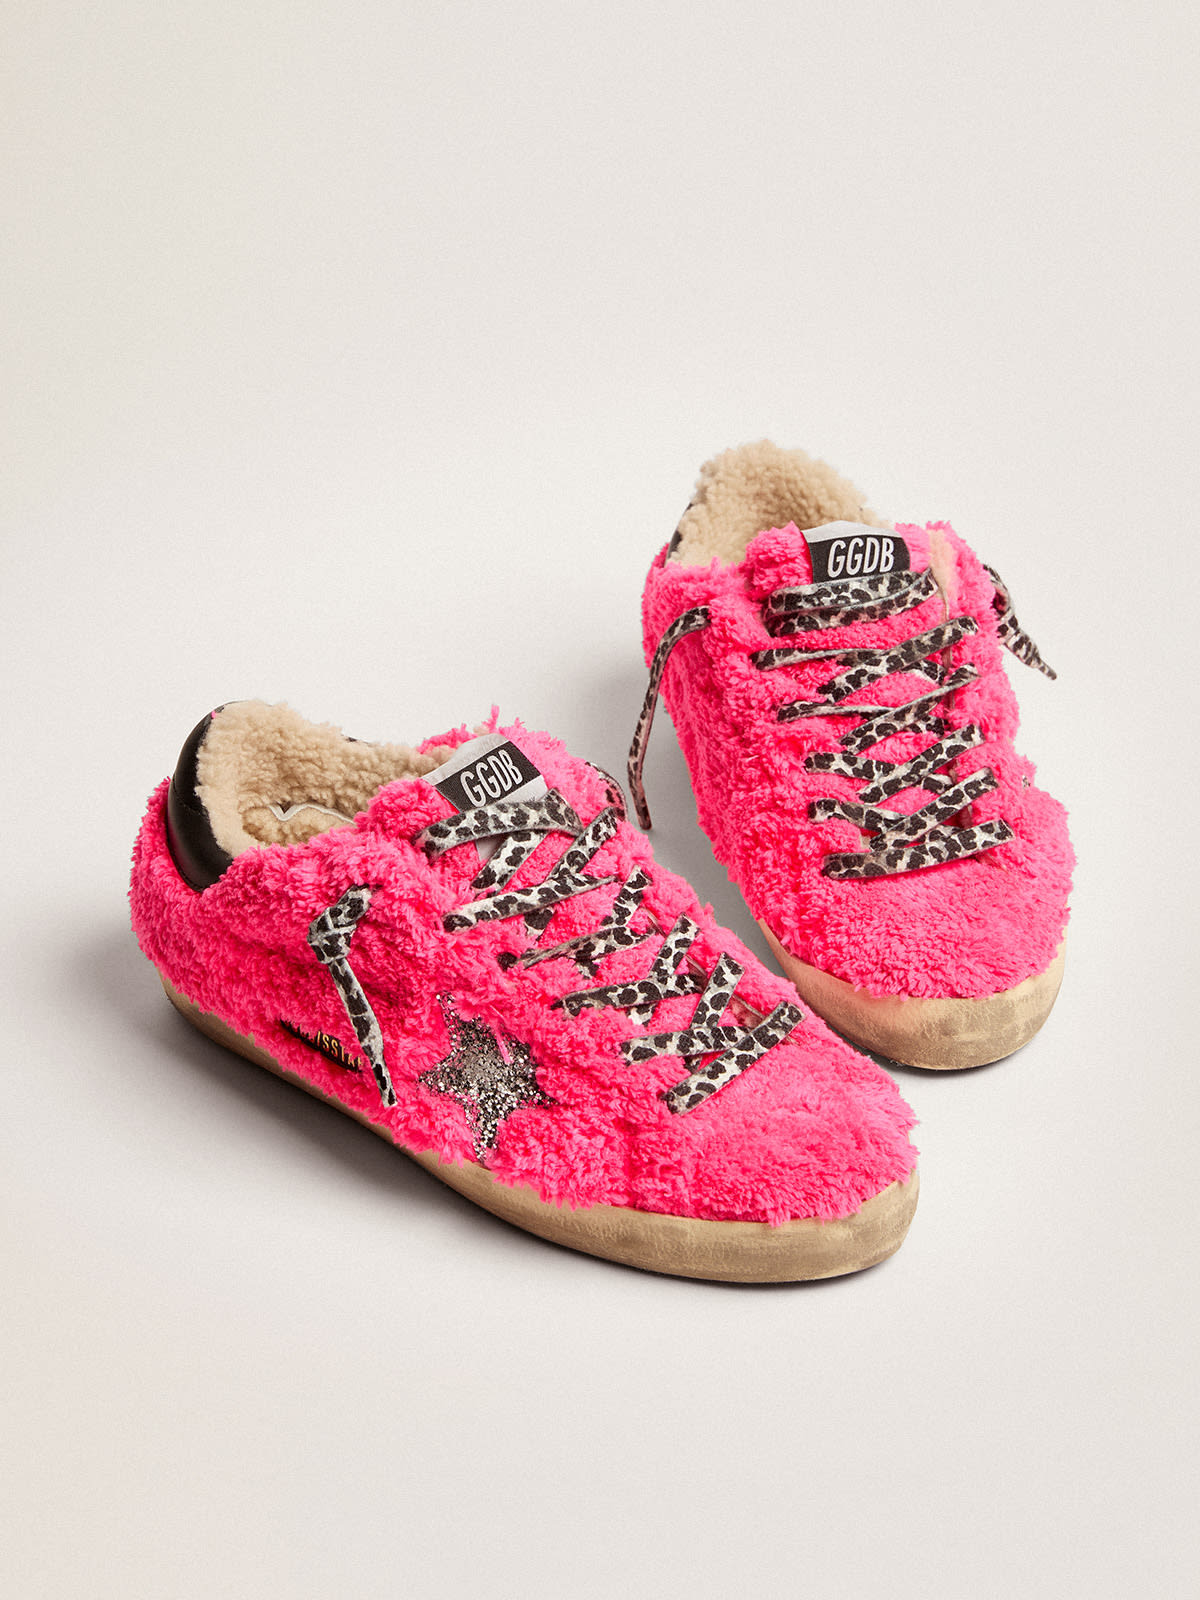 Golden Goose - Super-Star sneakers in fuchsia terry with silver glitter star and shearling lining in 